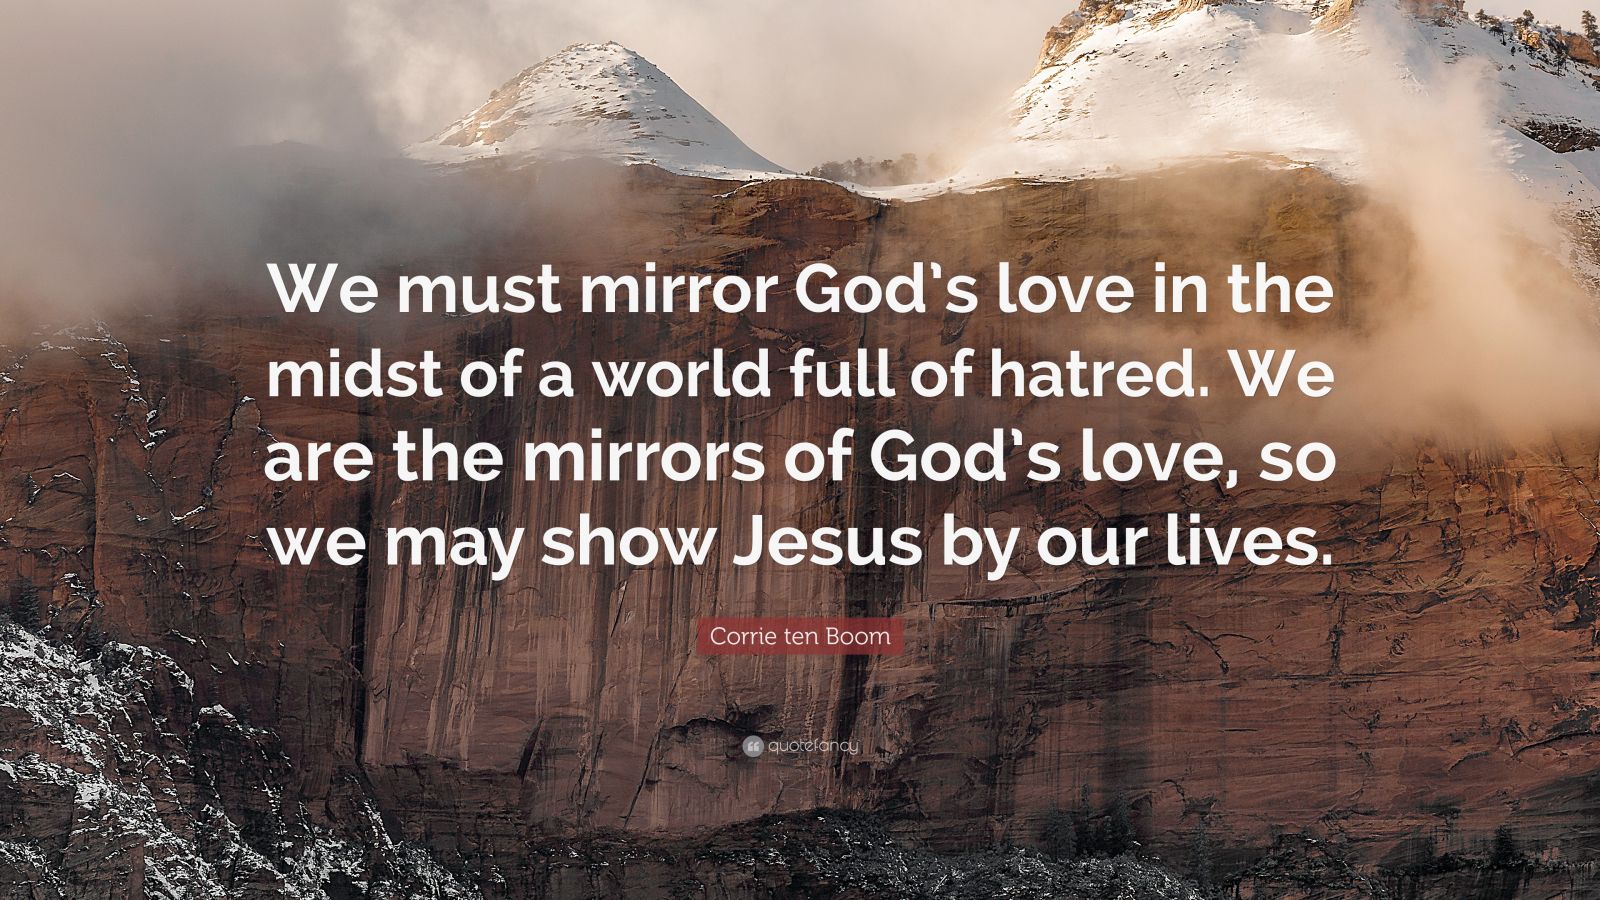 Corrie ten Boom Quote: “We must mirror God’s love in the midst of a